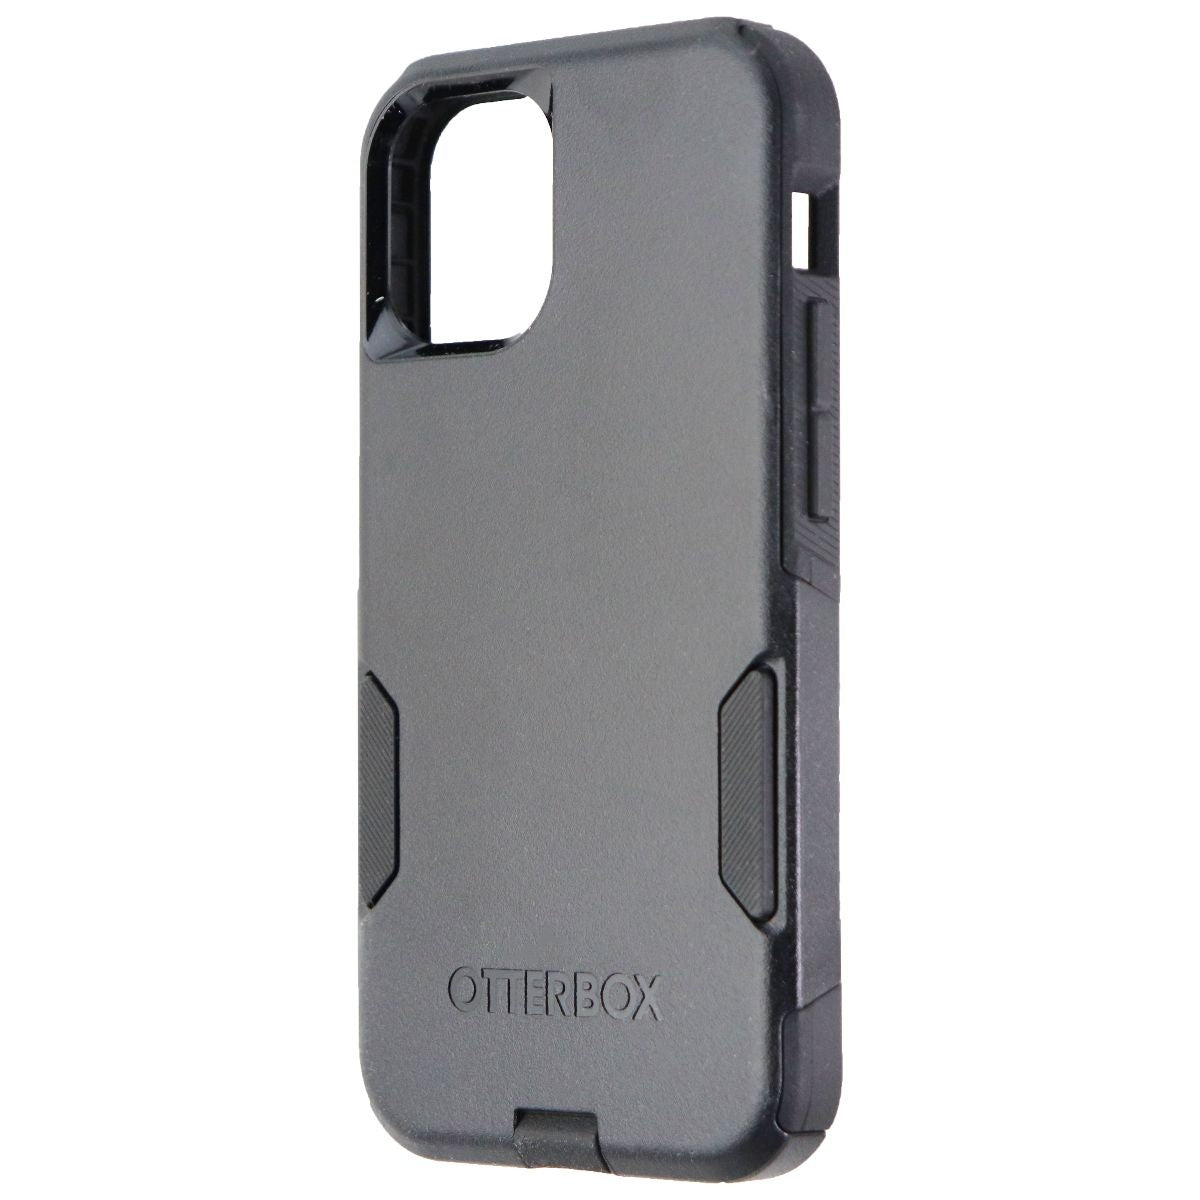 OtterBox Commuter Series Dual Layer Case for Apple iPhone 12 mini - Black